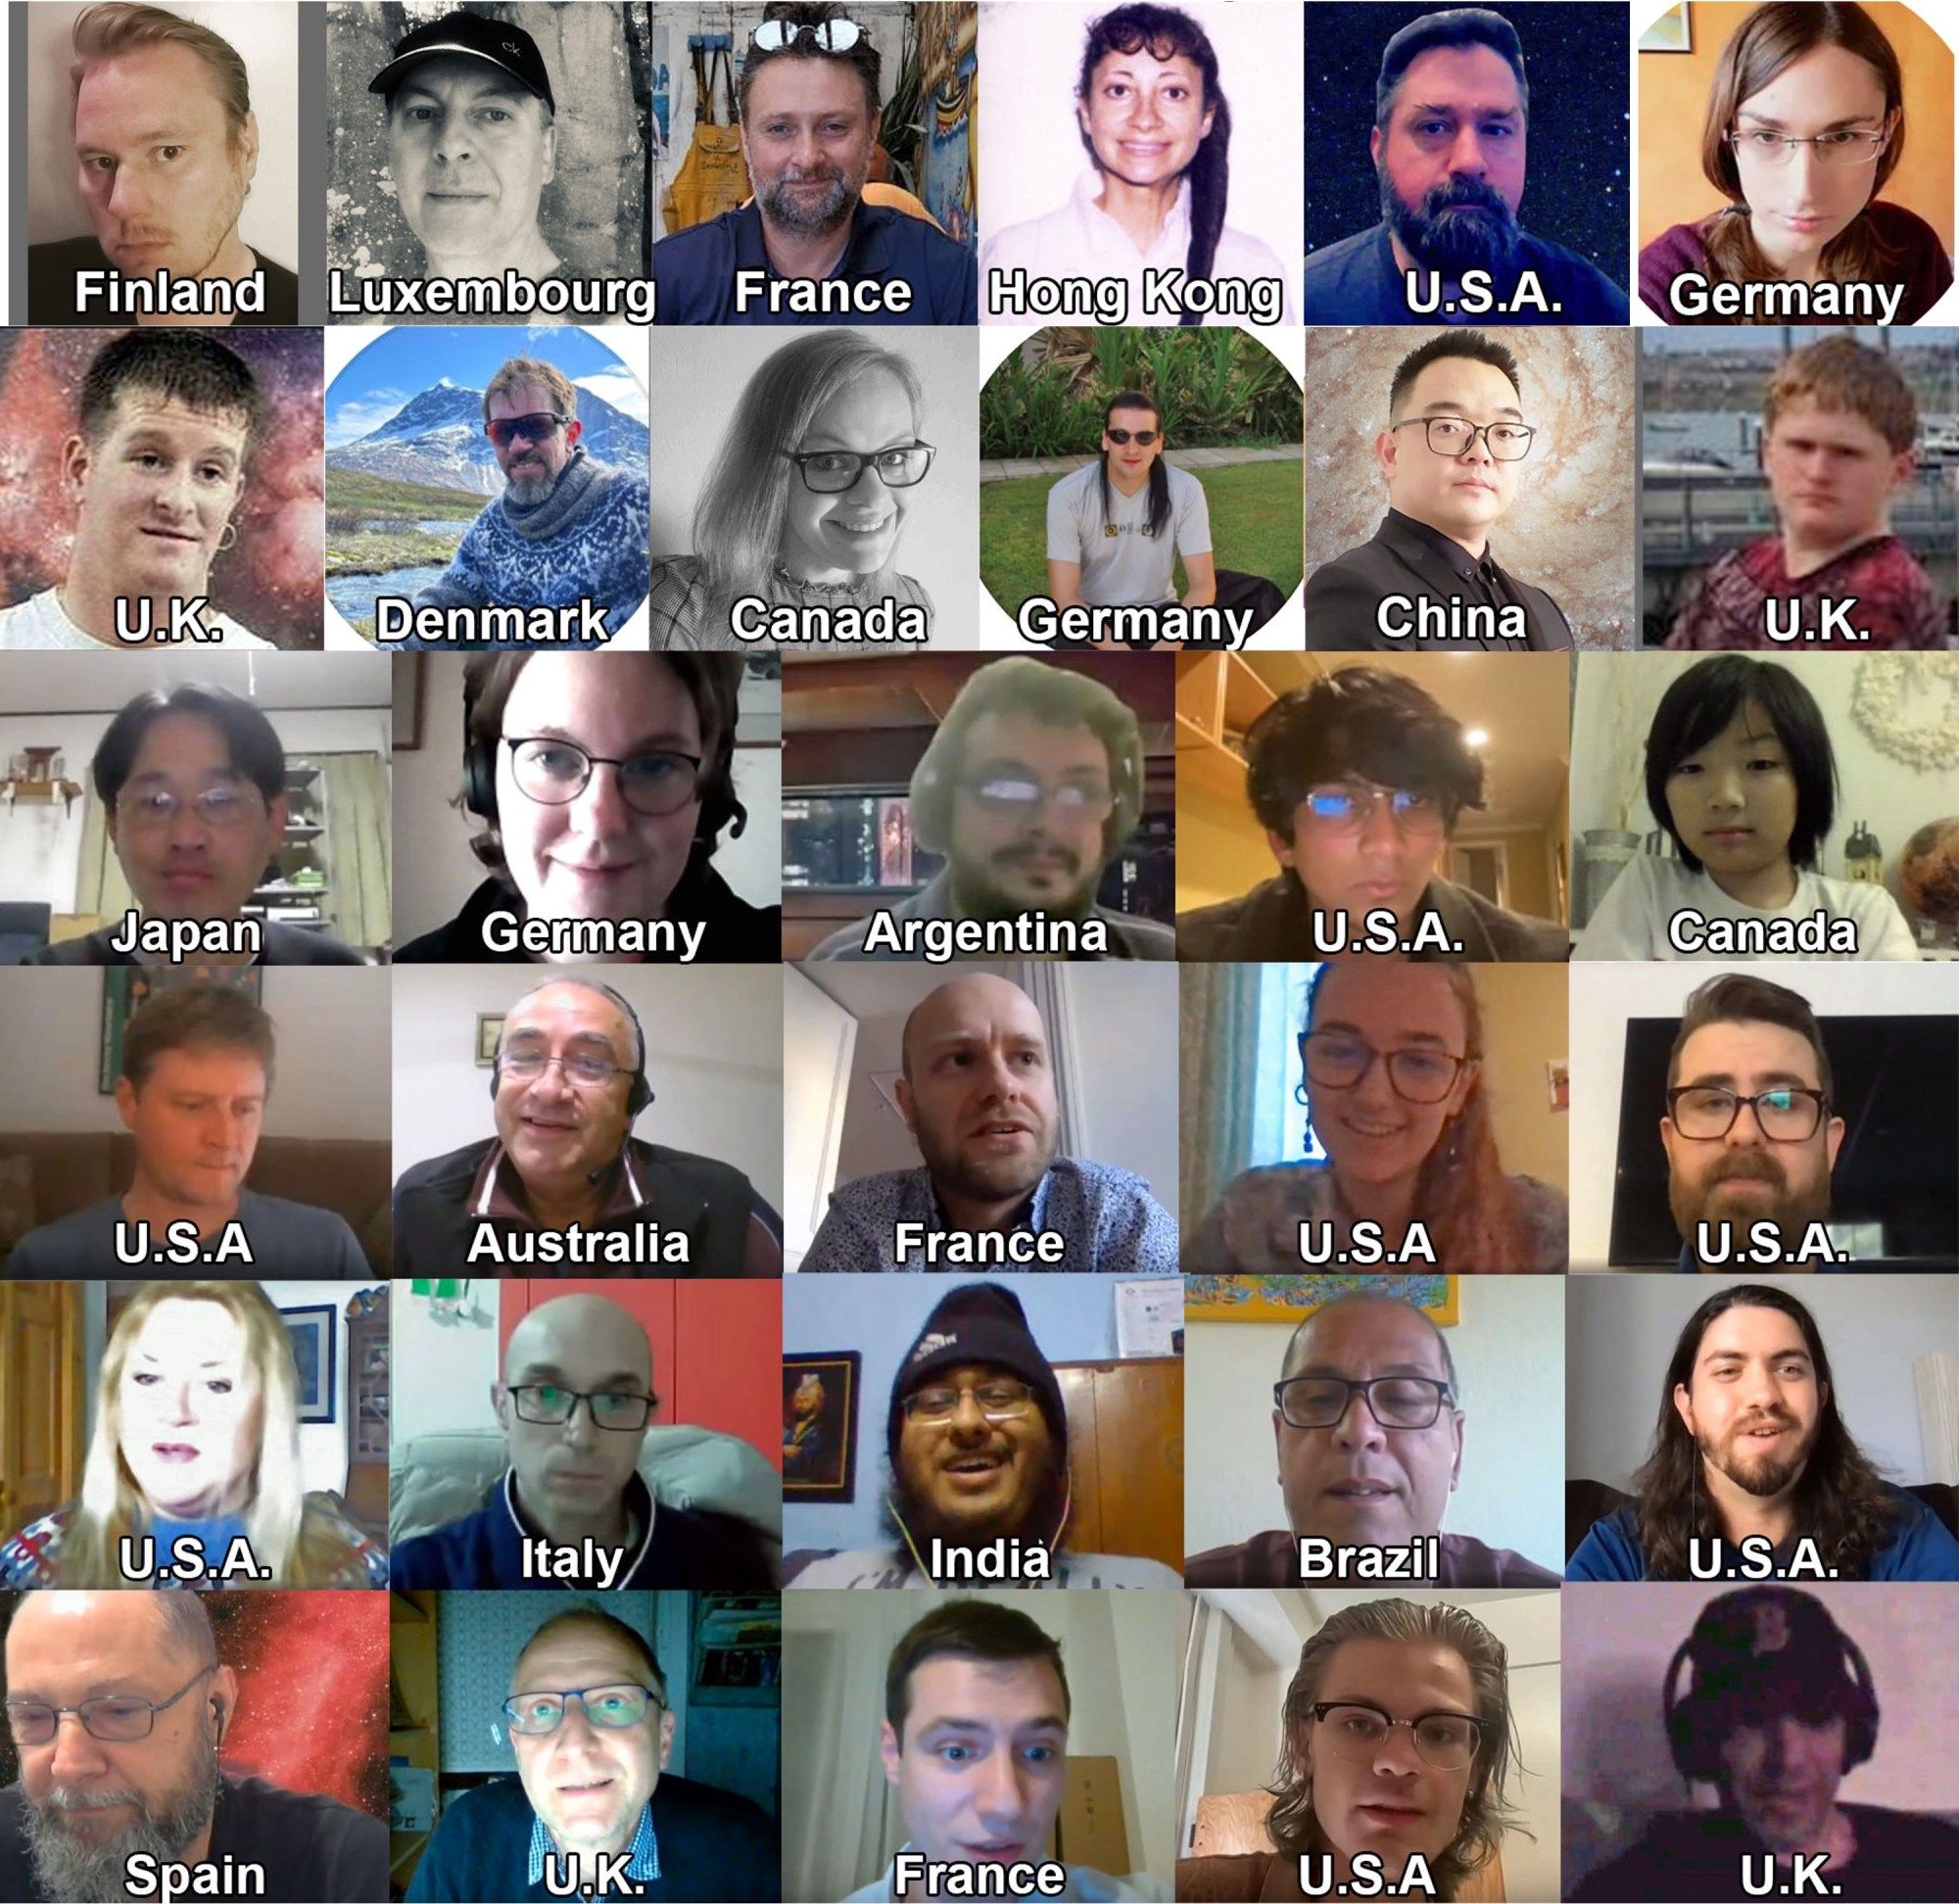 A photo collage of 42 faces from video conferencing software.